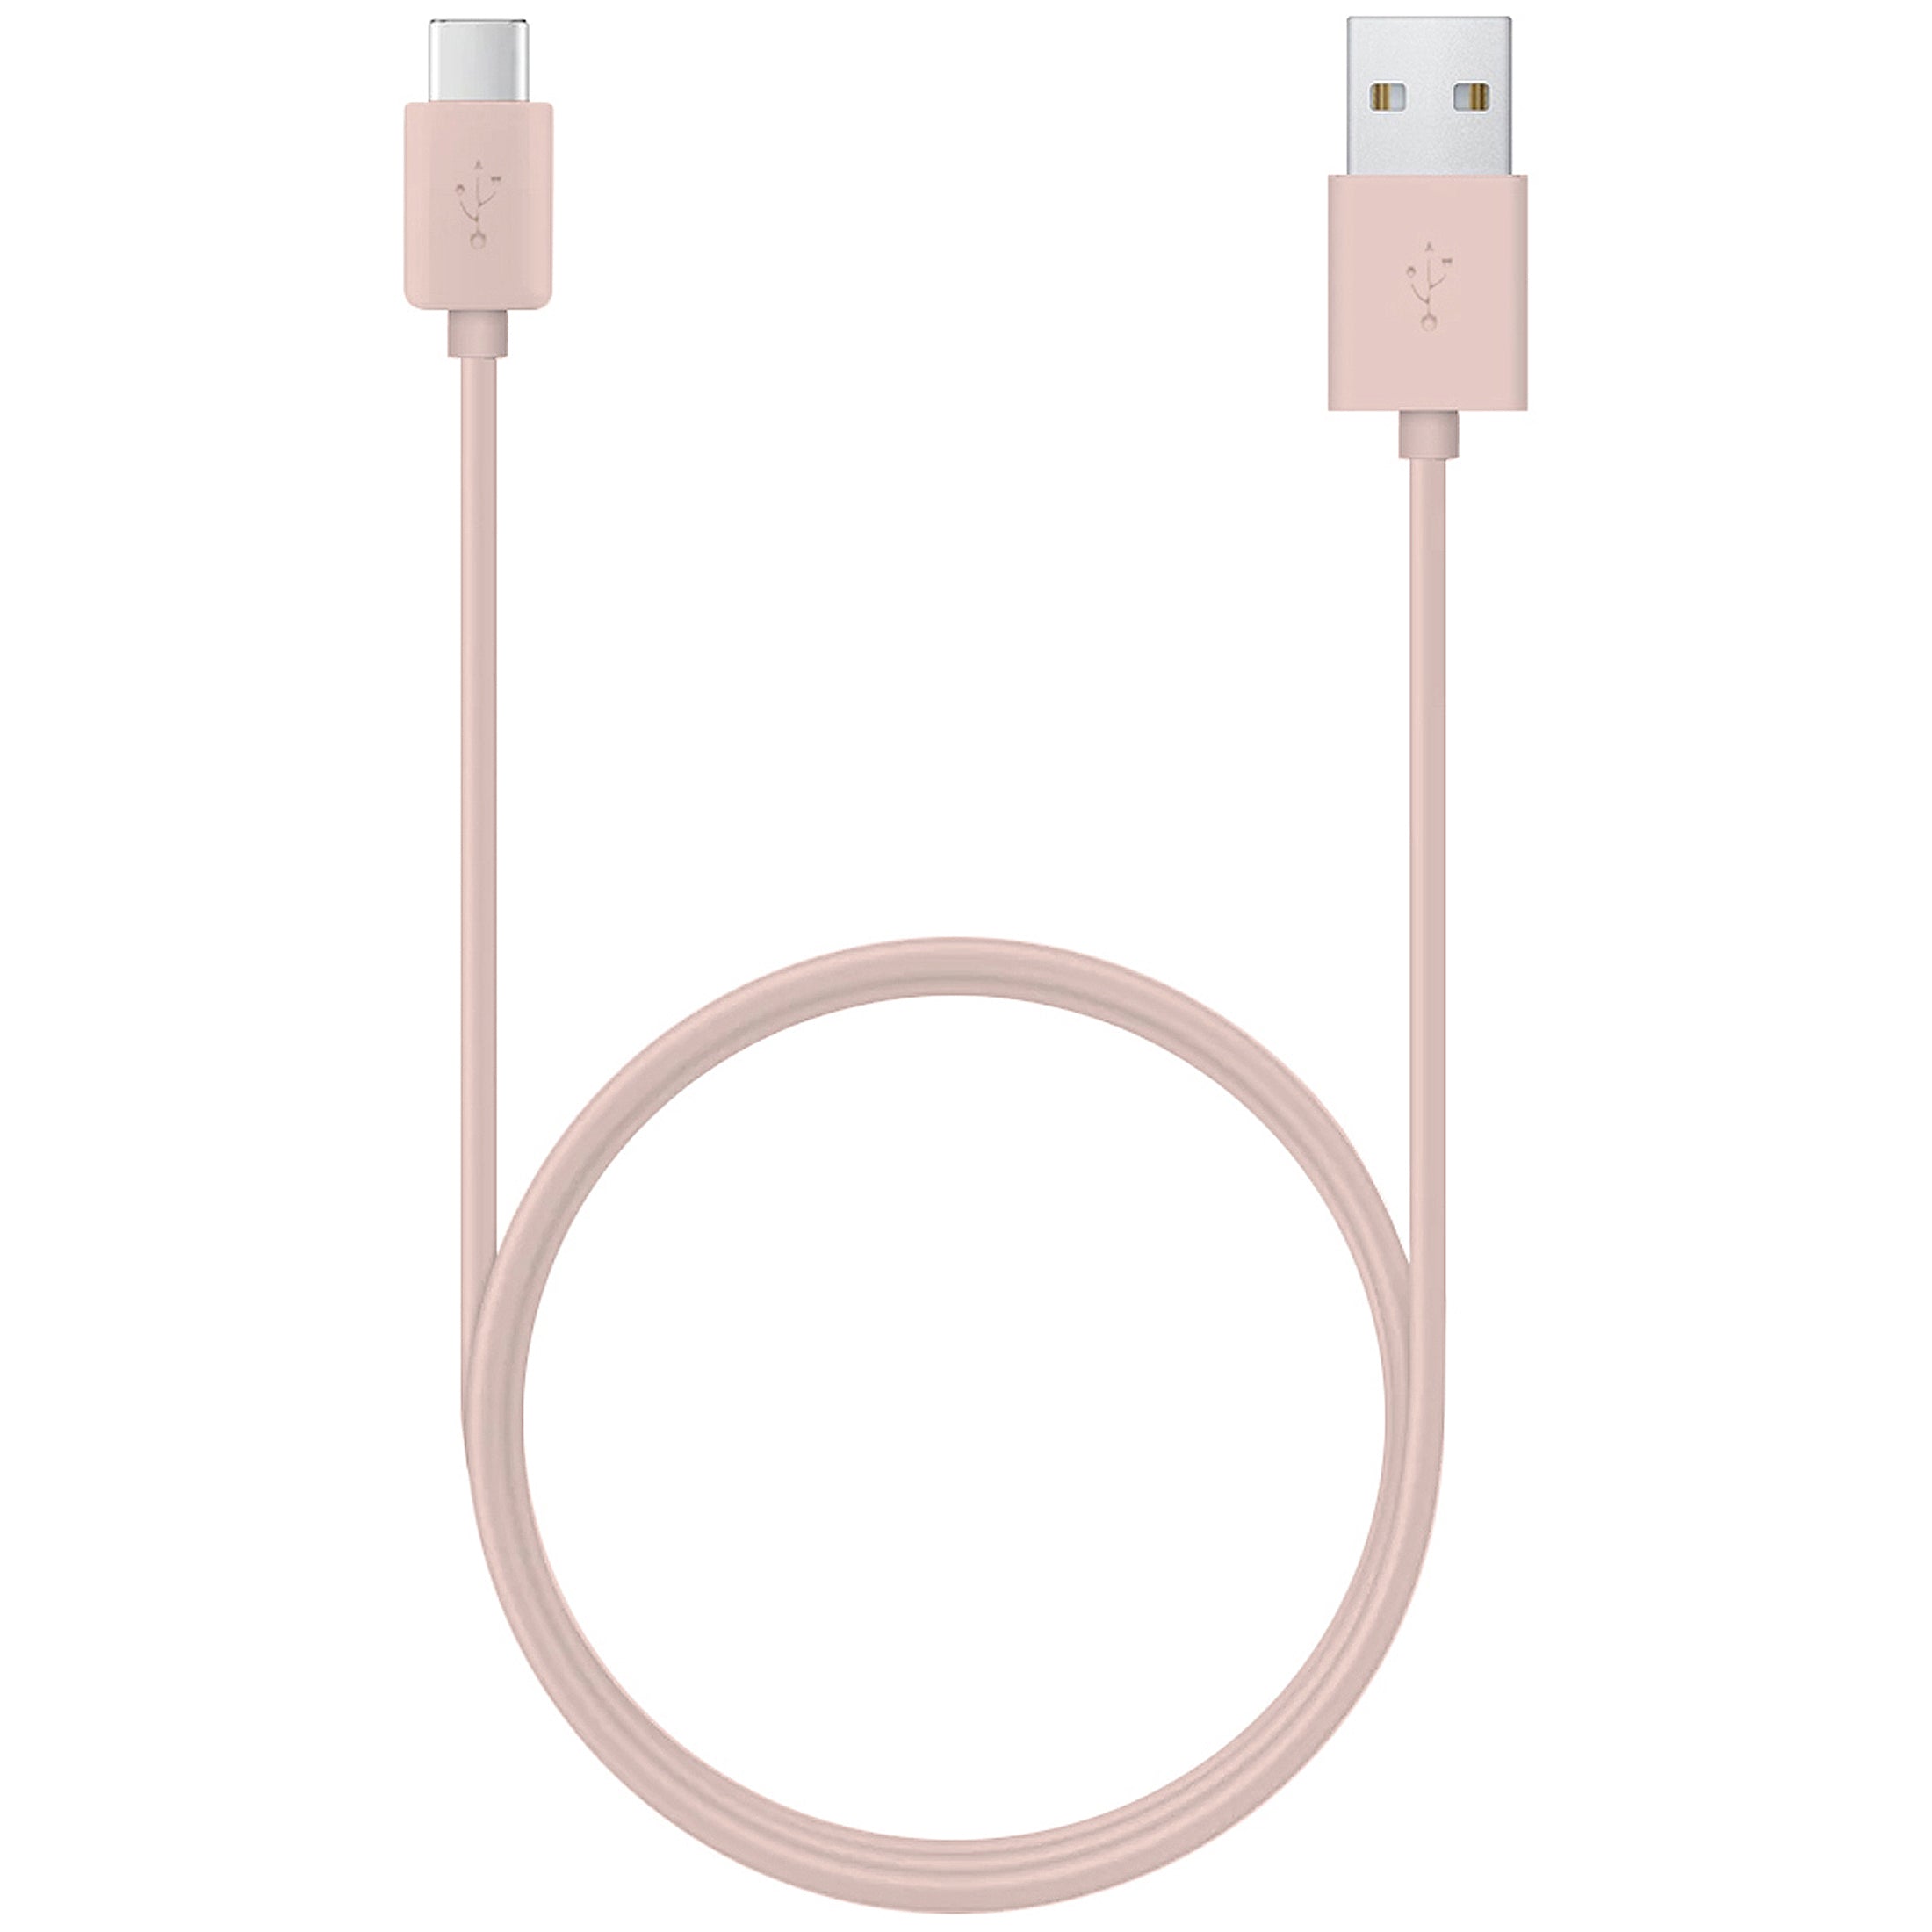 iTouch PlayZoom Smartwatch Charging Cable: Pink, 1ft affordable charger